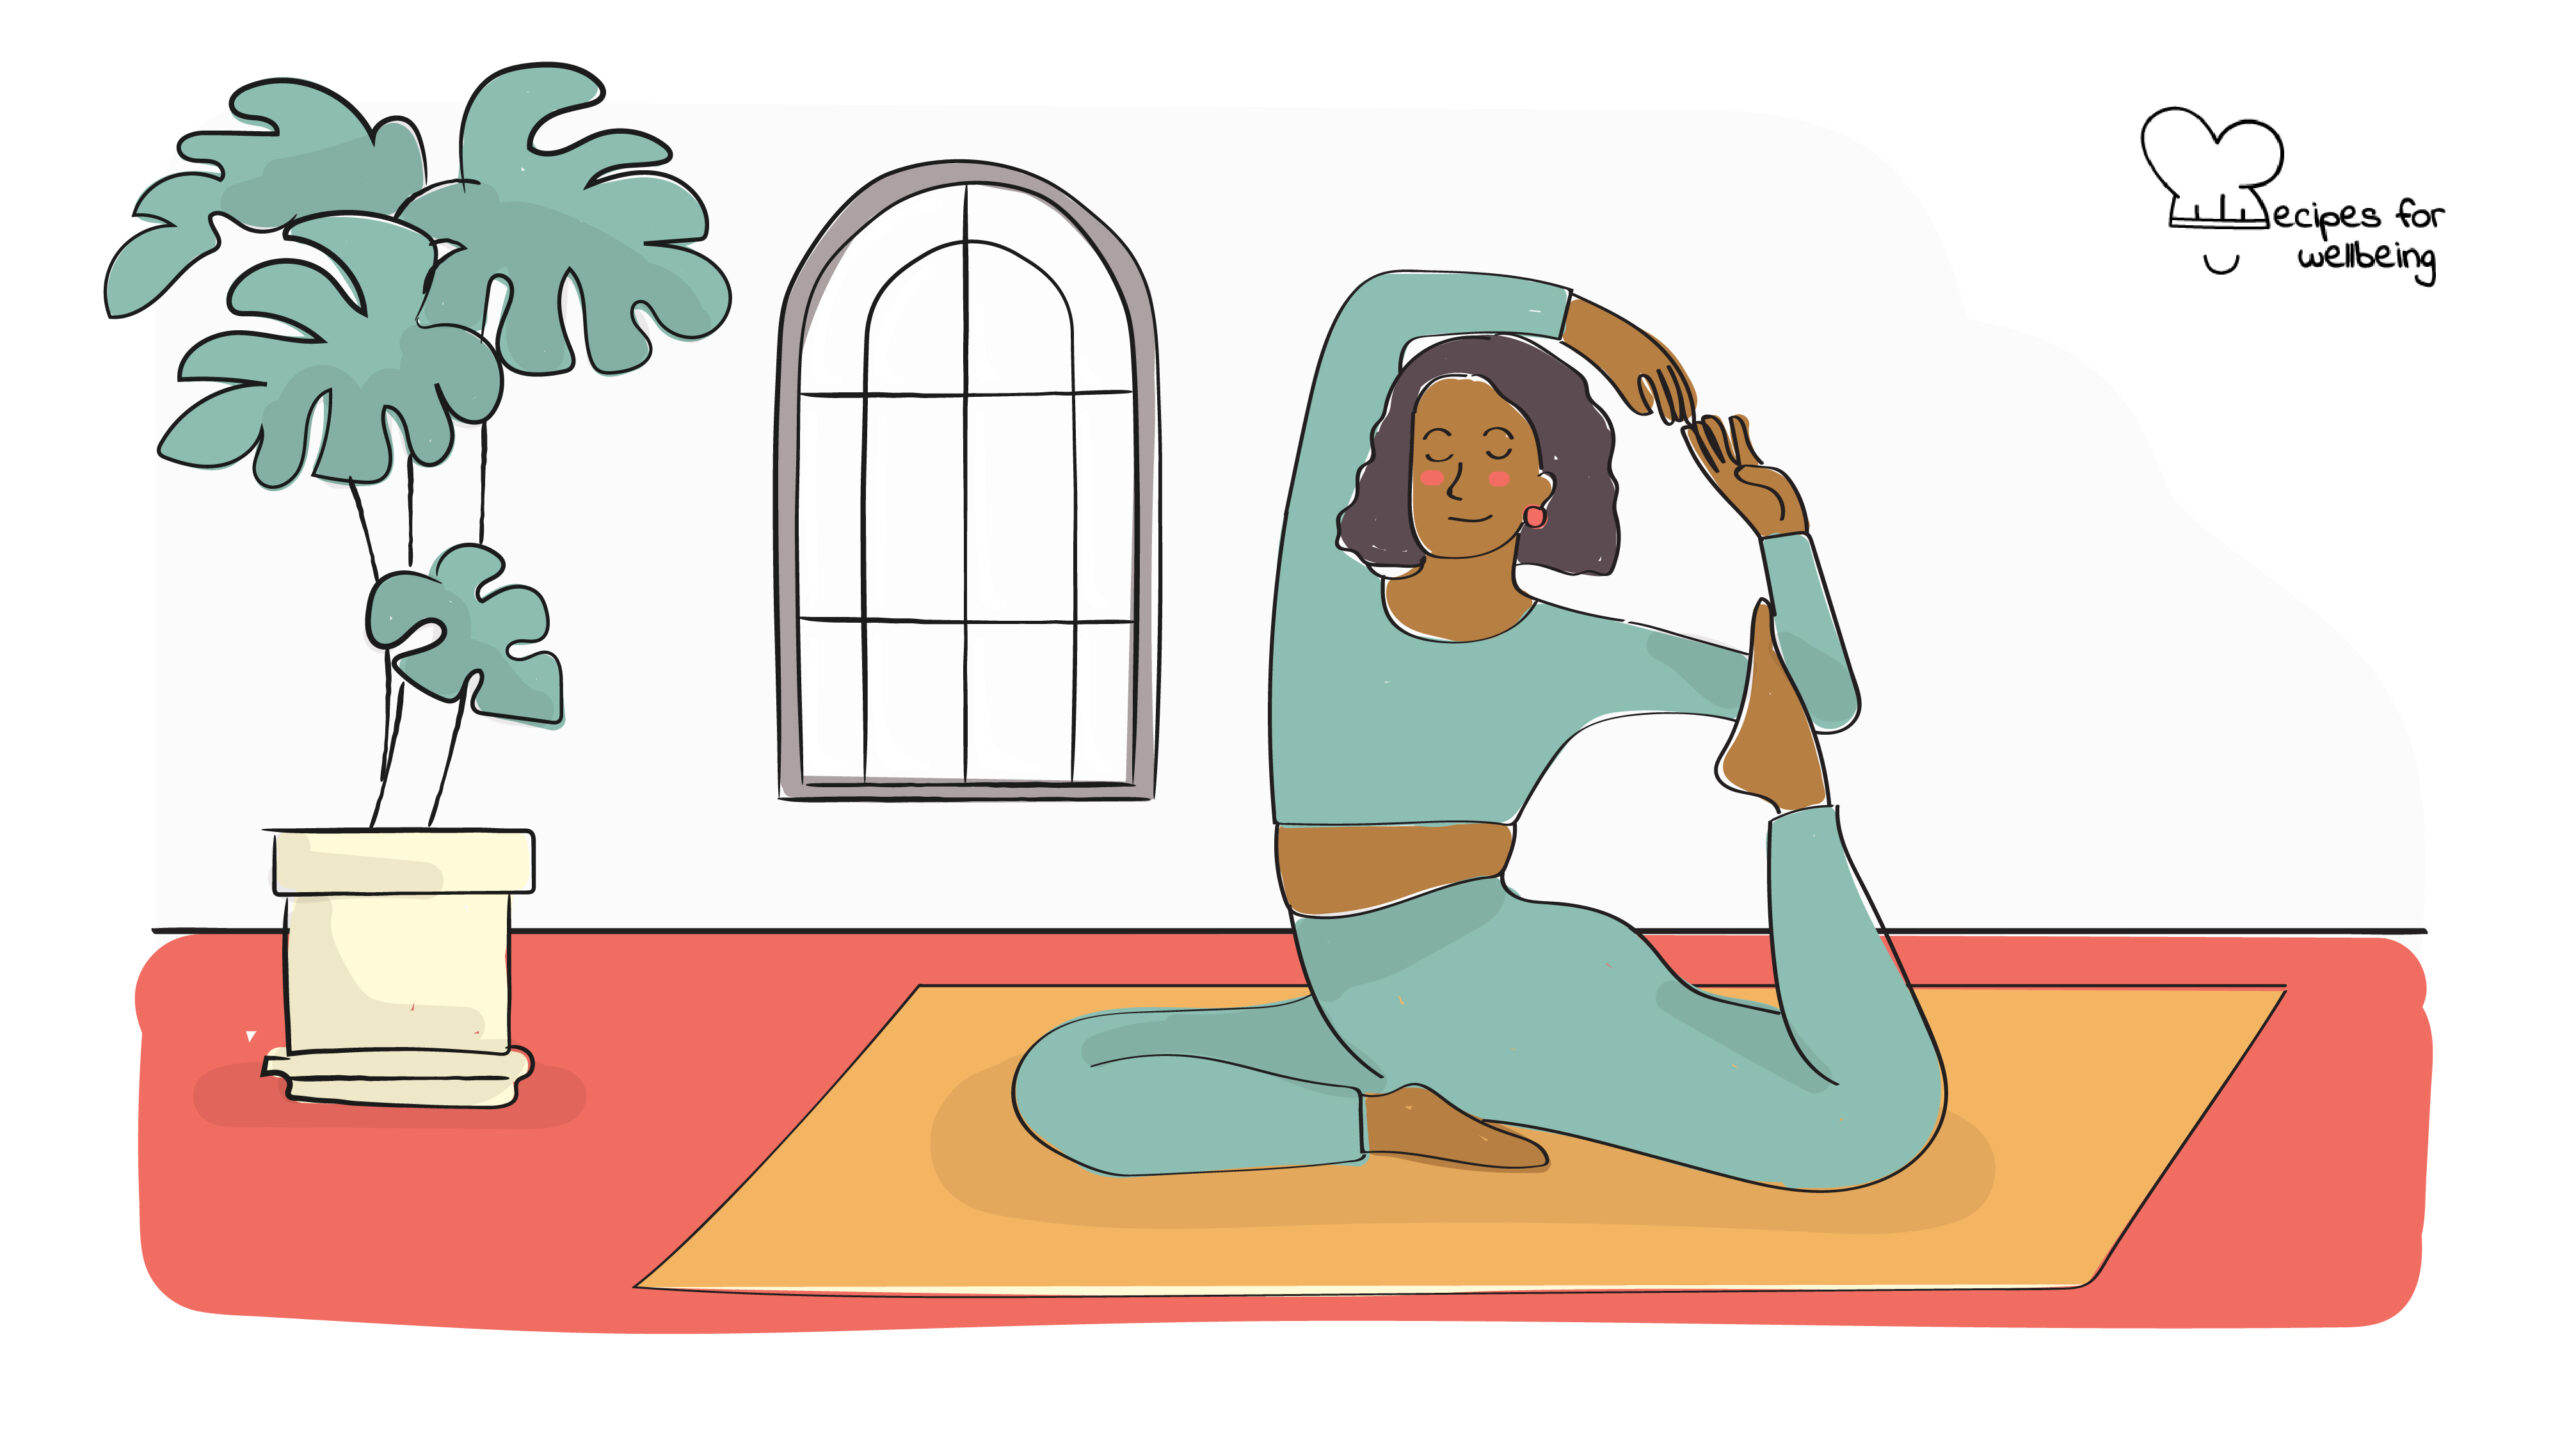 Illustration of a person in the mermaid yoga pose. © Recipes for Wellbeing